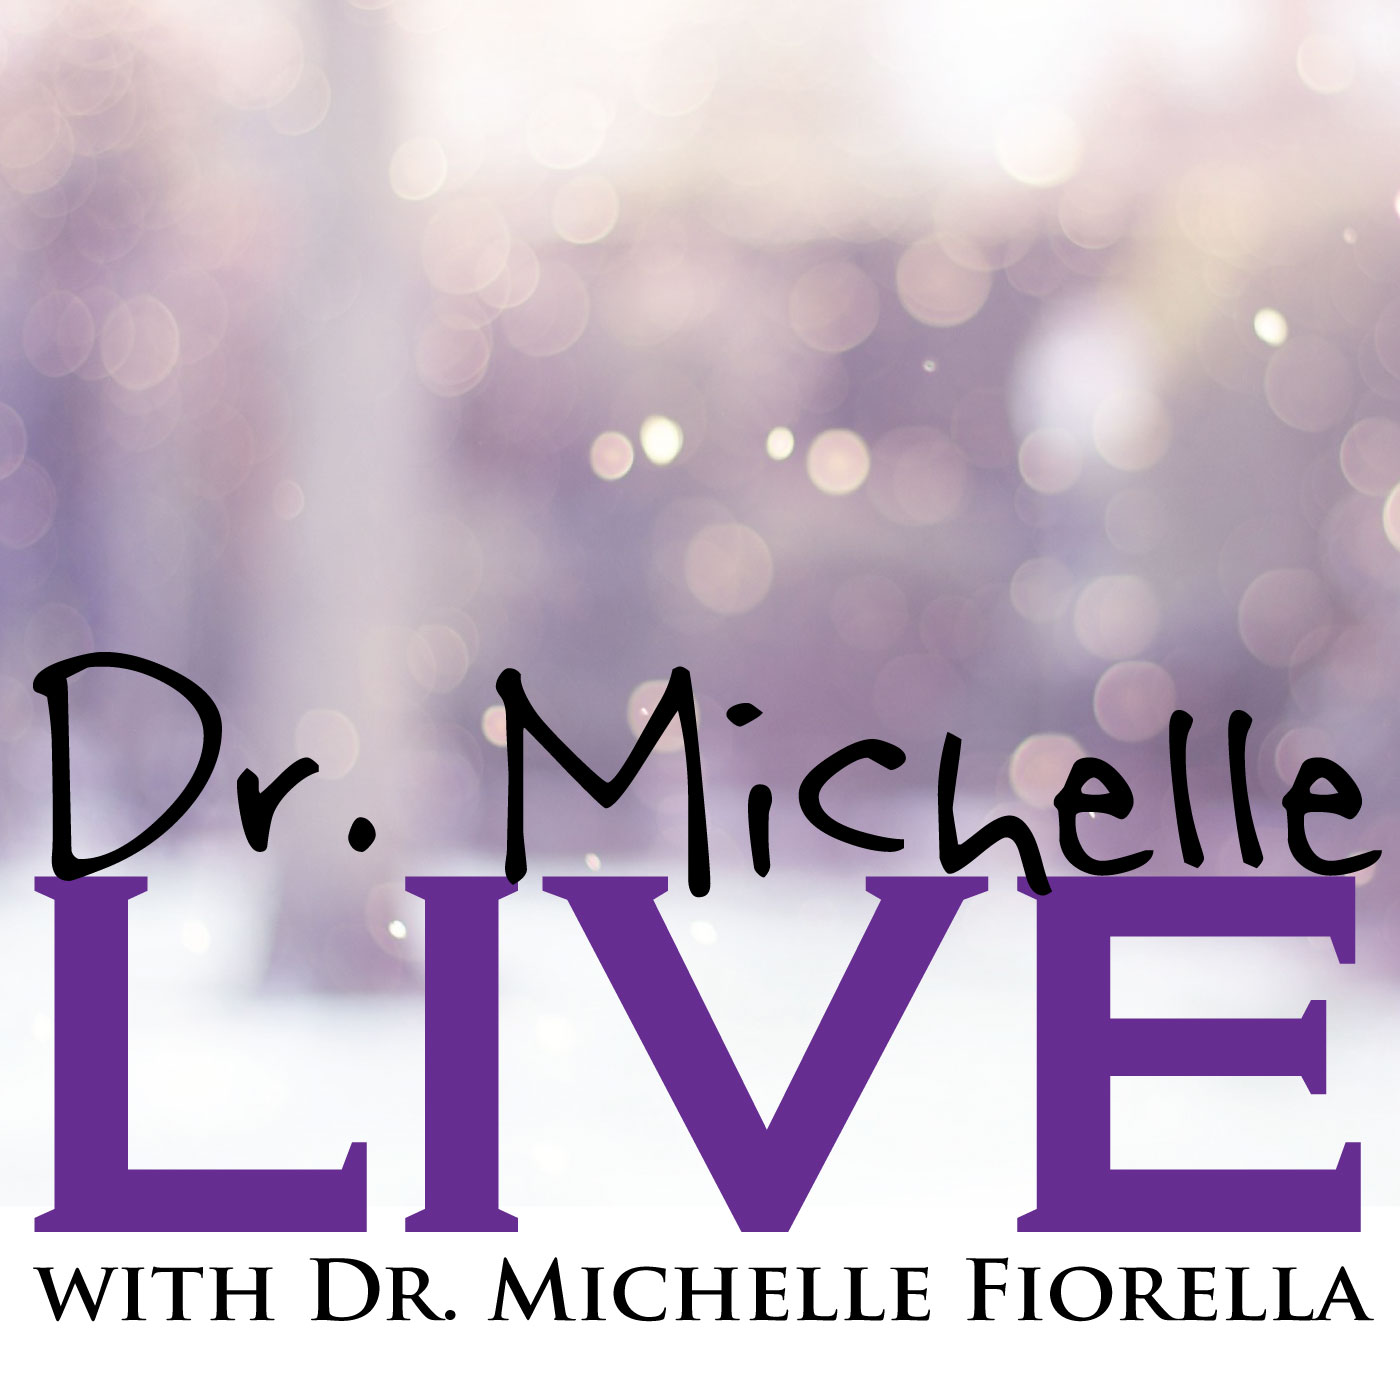 Dr. Michelle Live! 04/13/17 Following The Cross When Your Marriage is In Trouble.